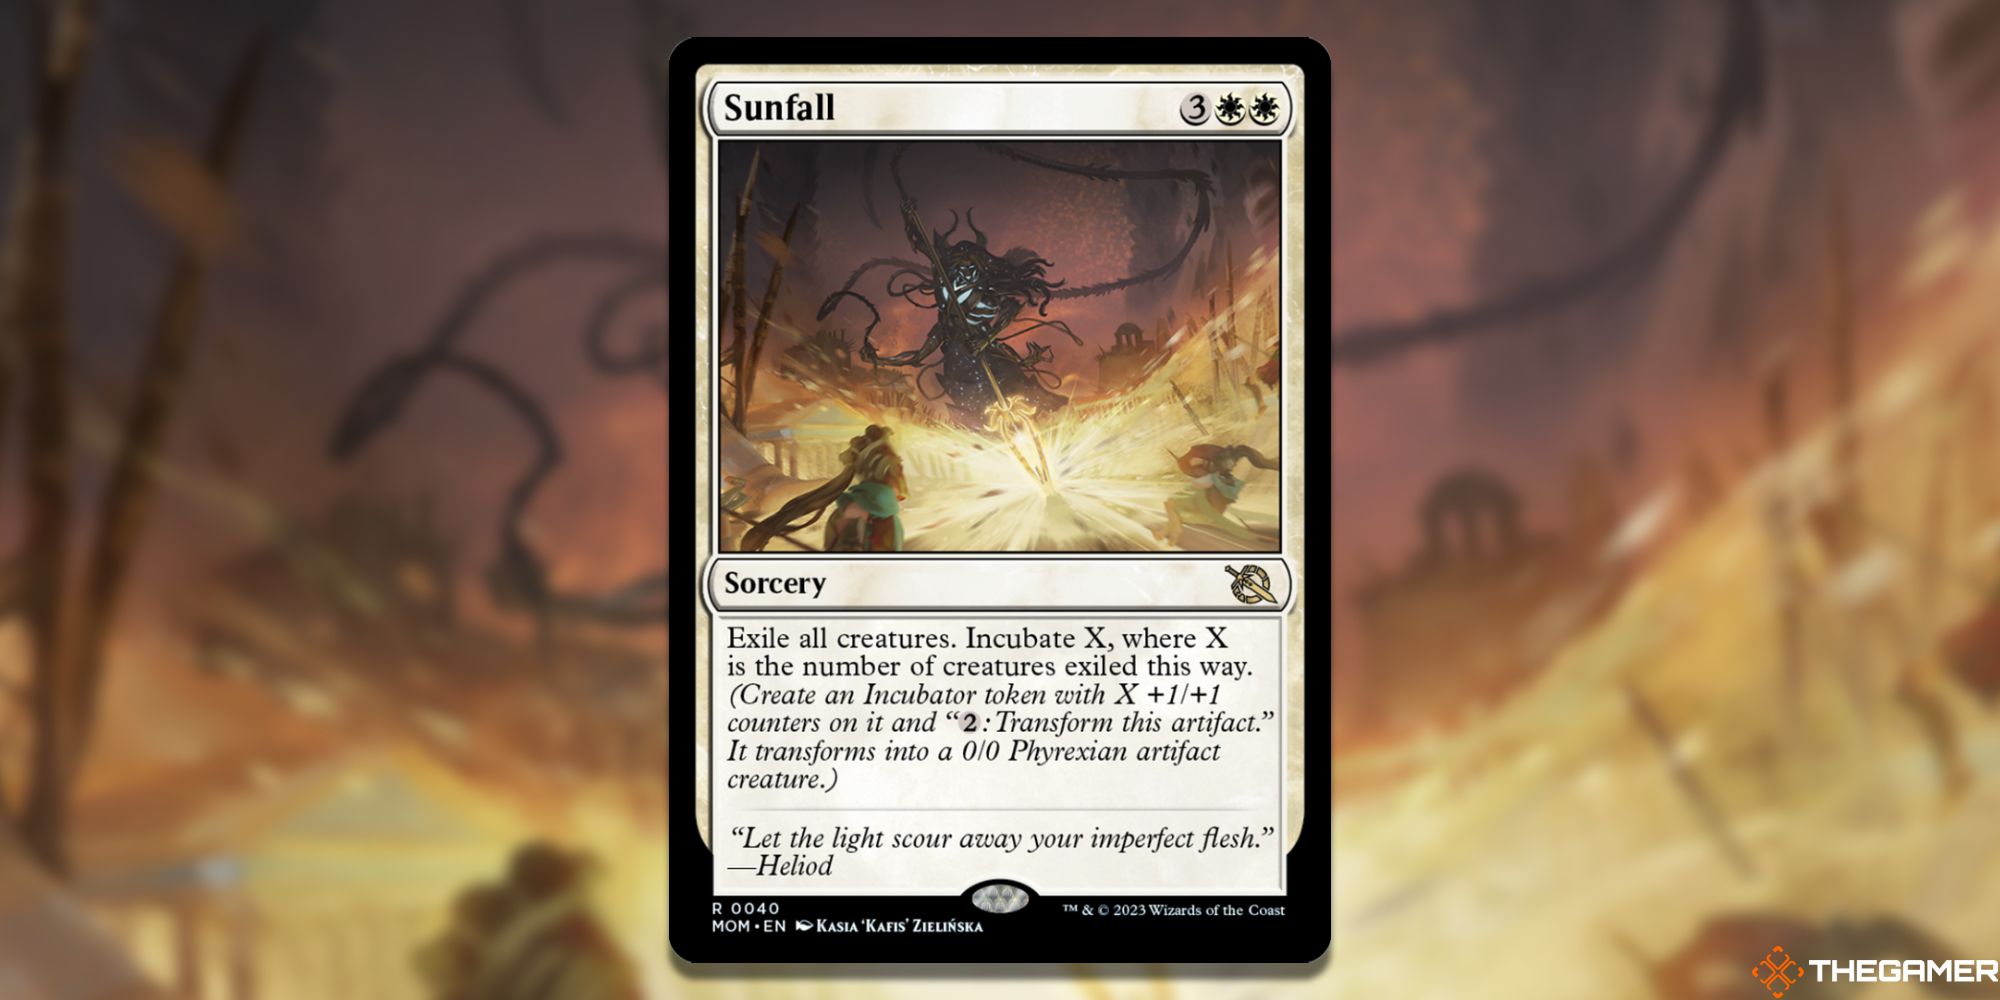 Image of the Sunfall card from Magic: The Gathering, art by Kasia 'Kafis' Zielnska